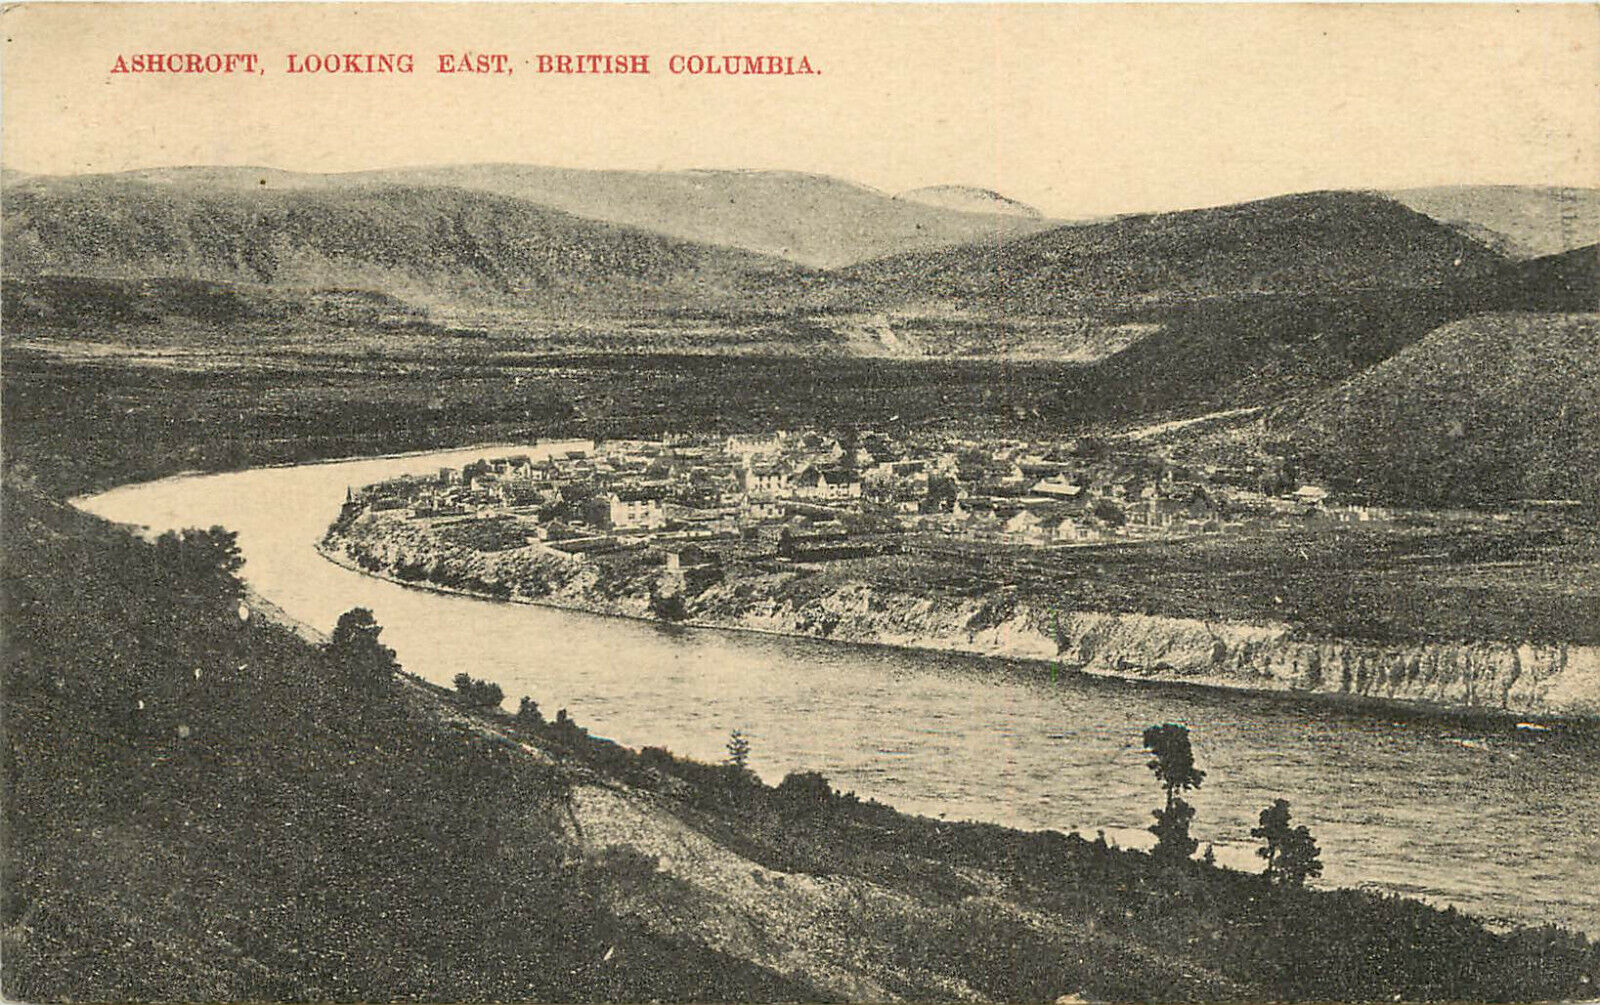 Vintage Postcard Ashcroft Looking East British Columbia Canada Thompson County 